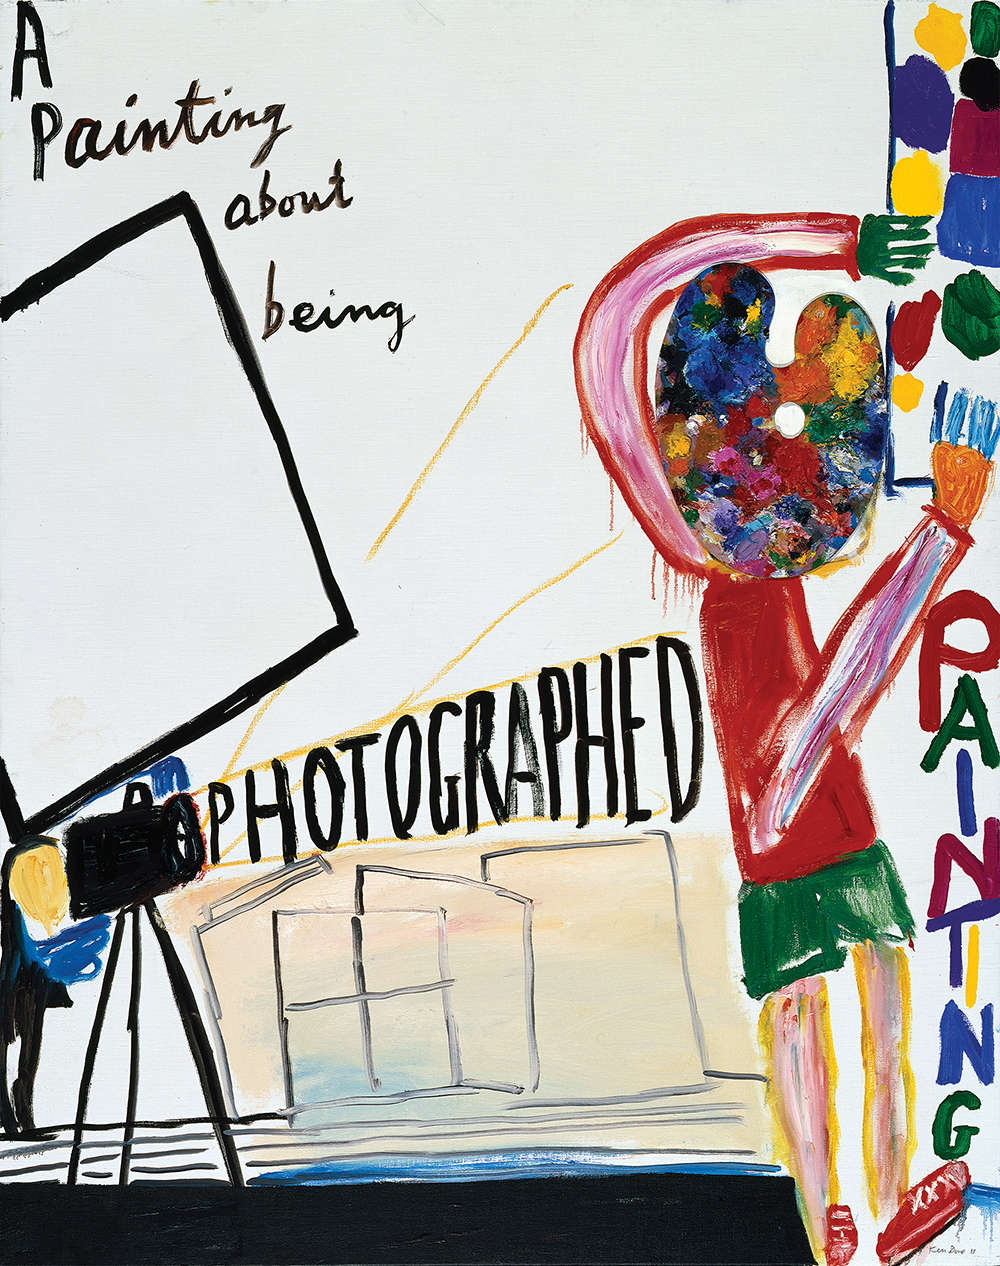 A painting about being photographed